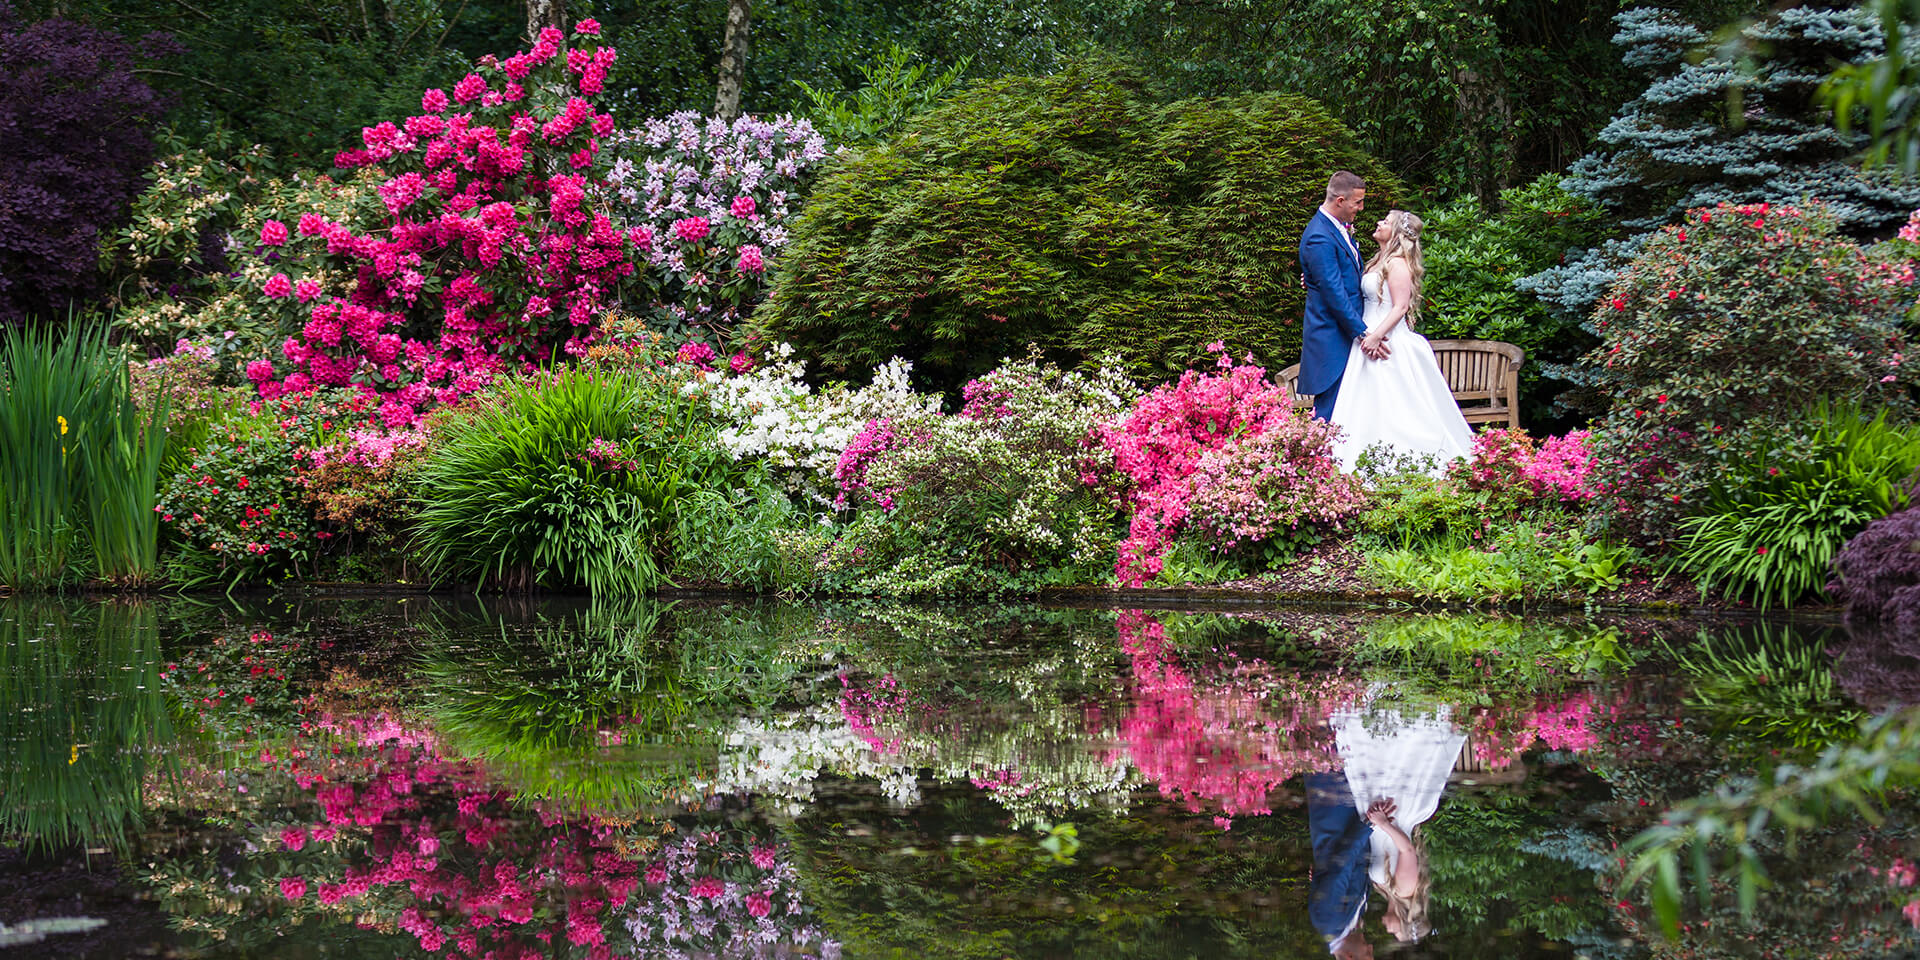 The pink flowers made the perfect setting for a photo during this spring wedding at Rivervale Barn